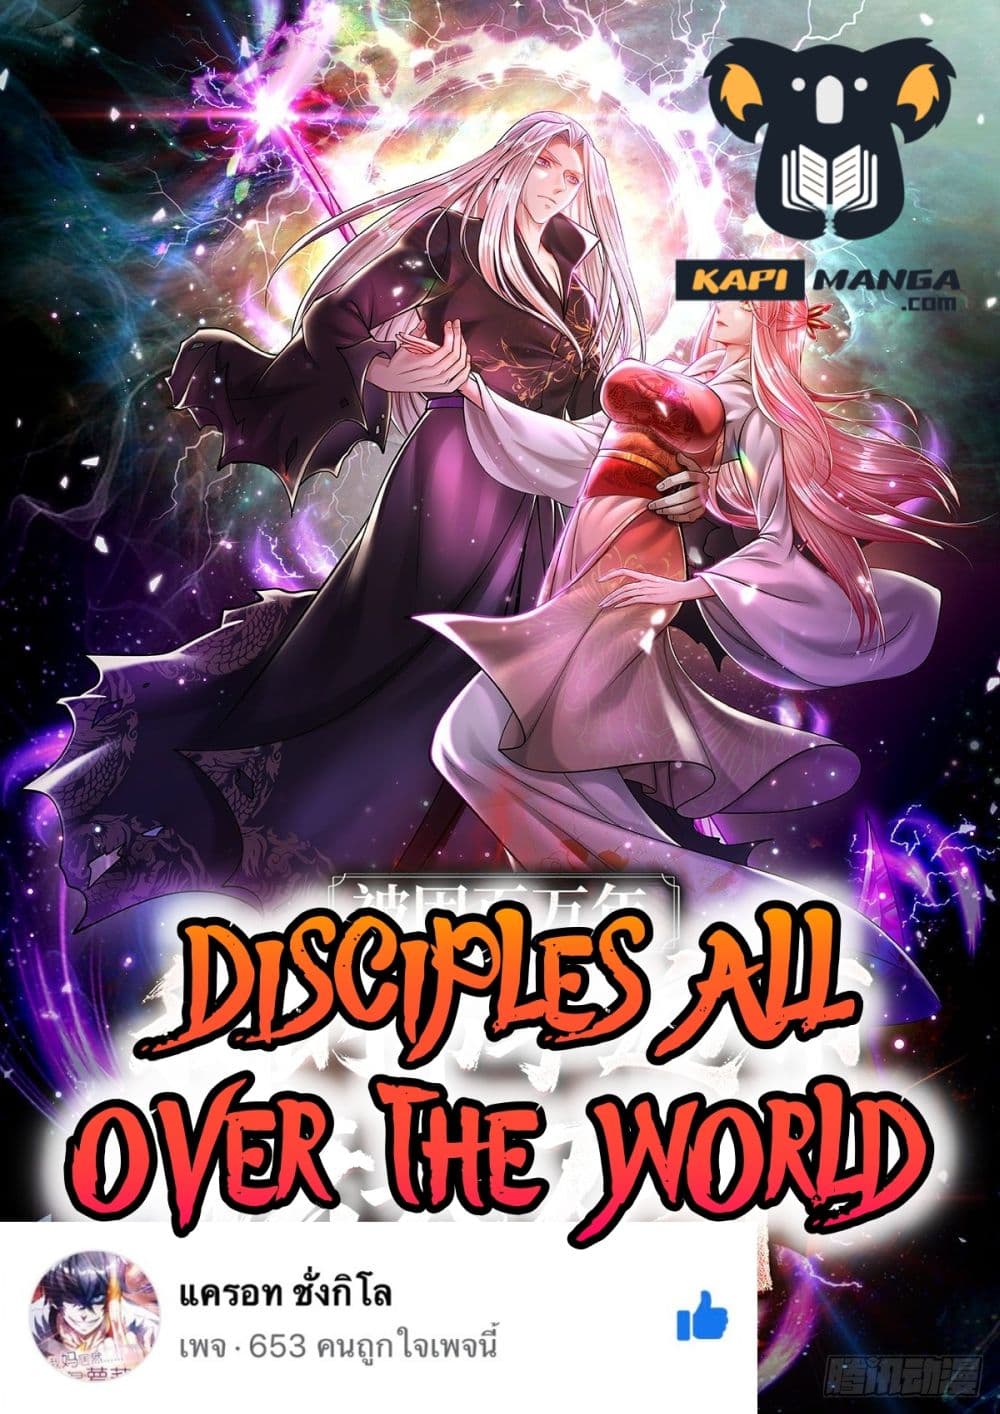 Disciples All Over the World à¸à¸­à¸à¸à¸µà¹ 62 (1)